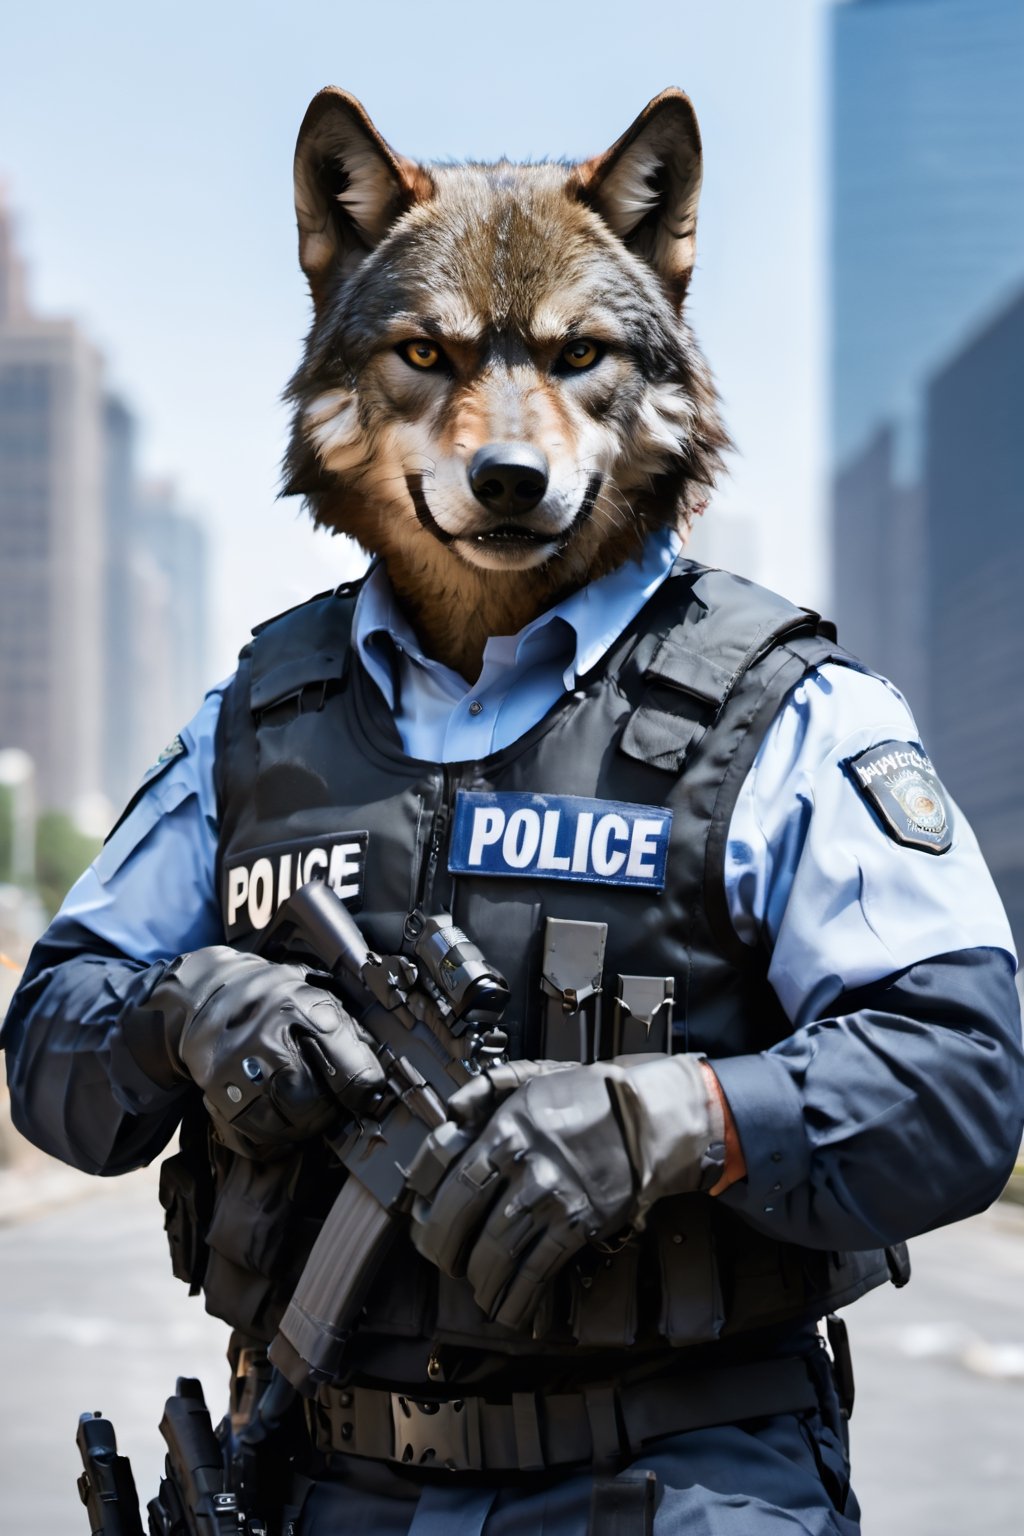 
policeman with wolf face, police uniform, vest, tactical gloves, image background of a city, medium shot, medium view,mw